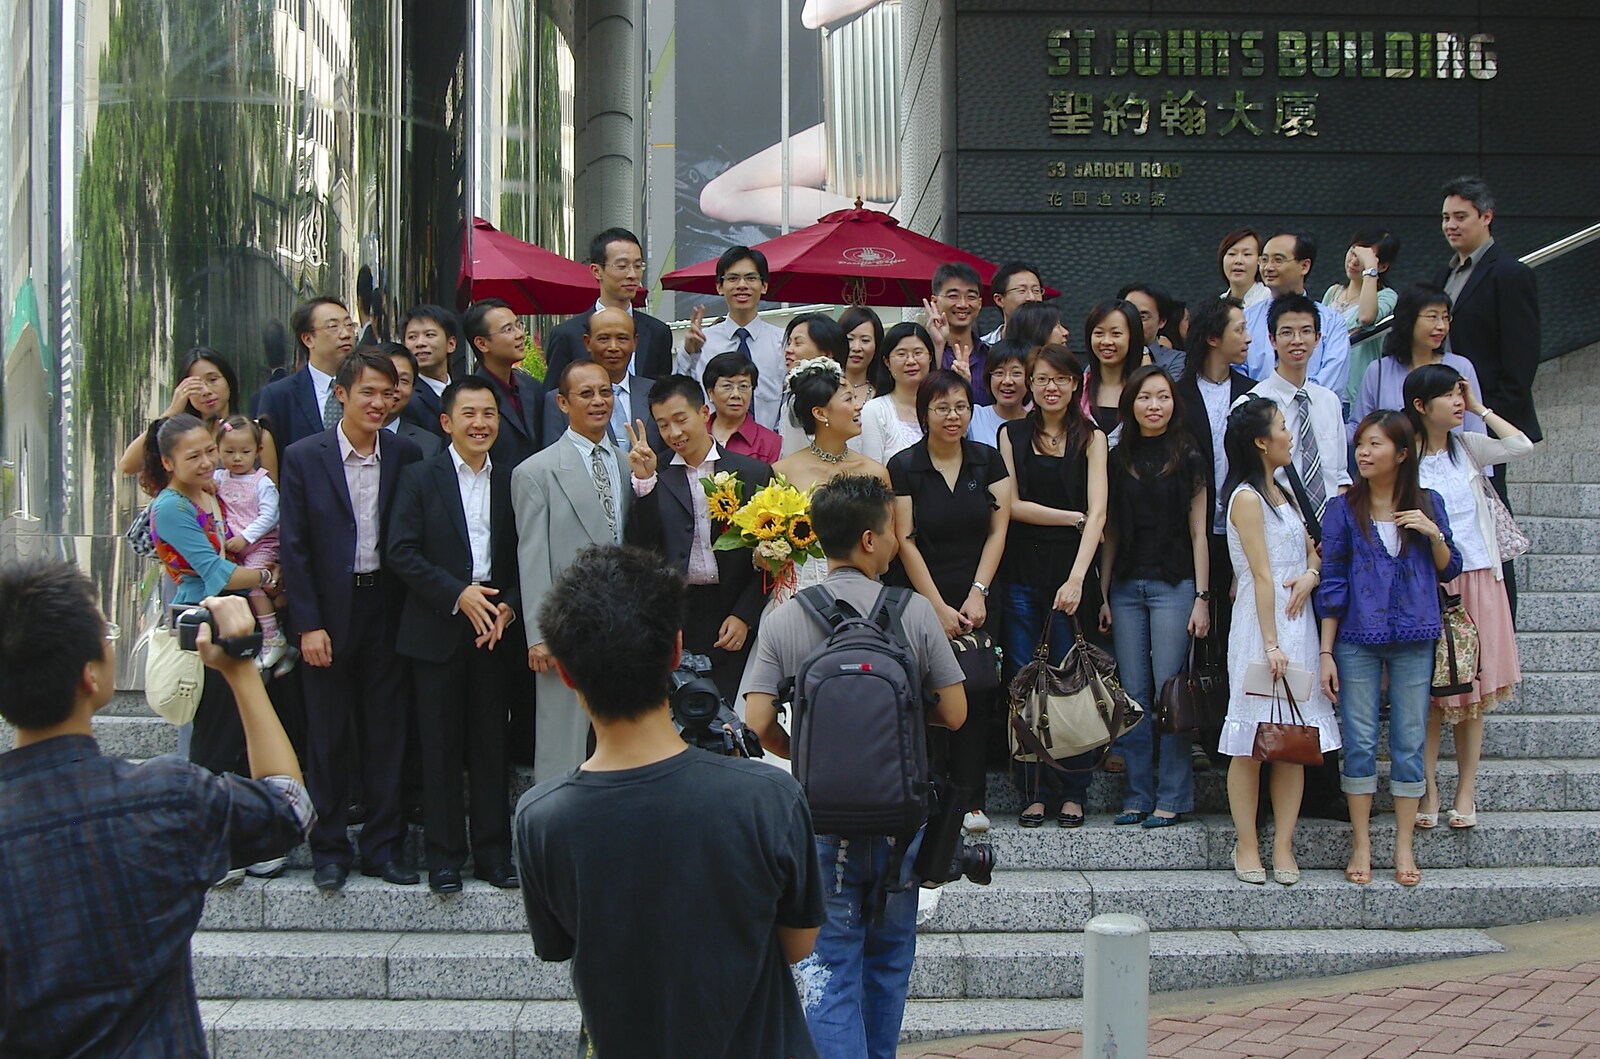 Wedding on the steps of the St. John's Building from Wan Chai and Central, Hong Kong, China - 2nd October 2006